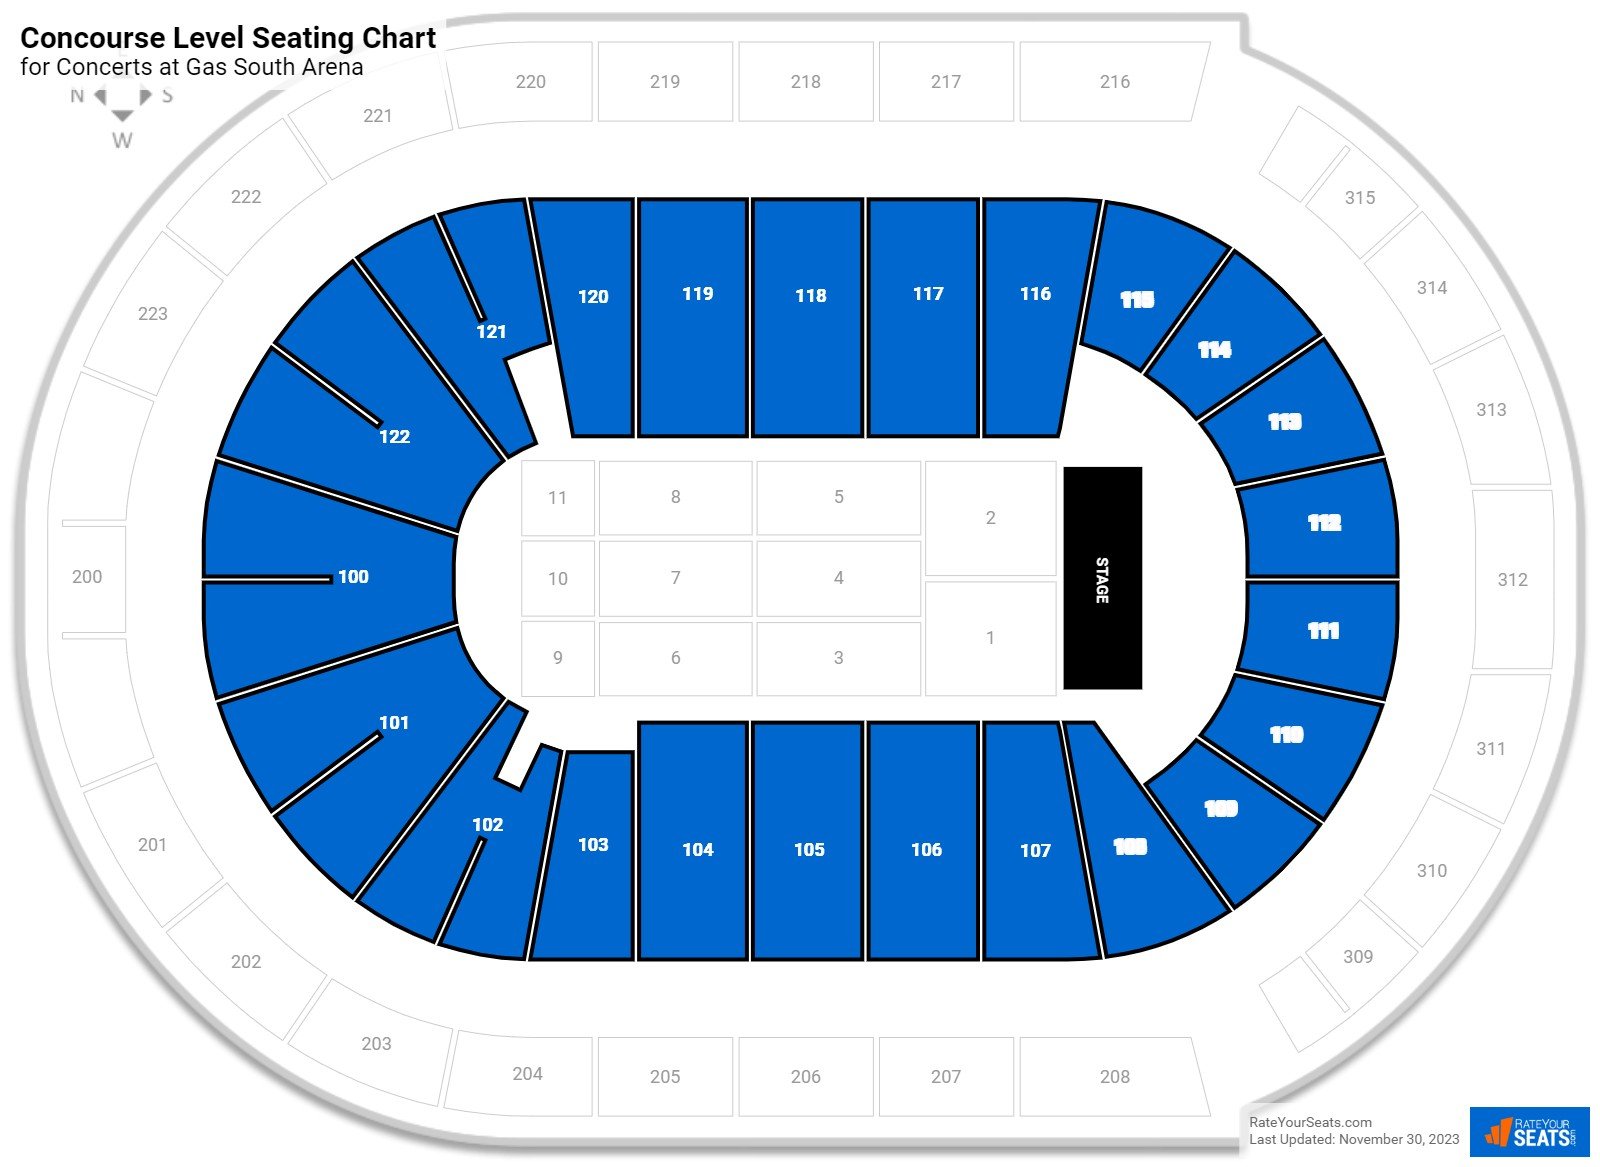 Concert Concourse Level Seating Chart at Gas South Arena